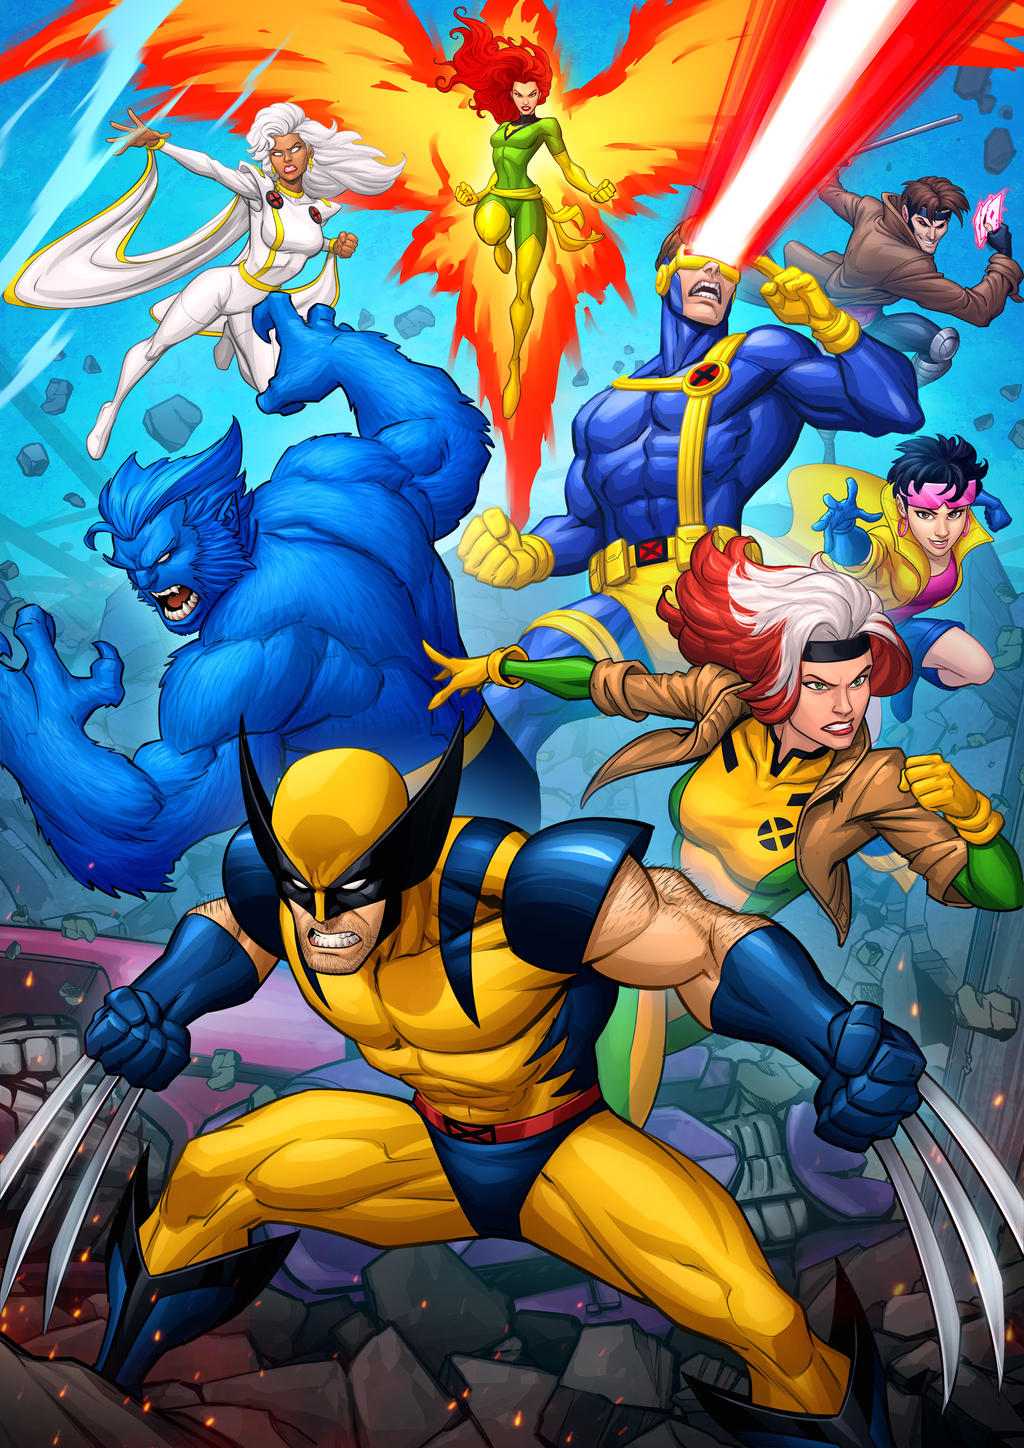 X-Men - 90s Animated Series by PatrickBrown on DeviantArt